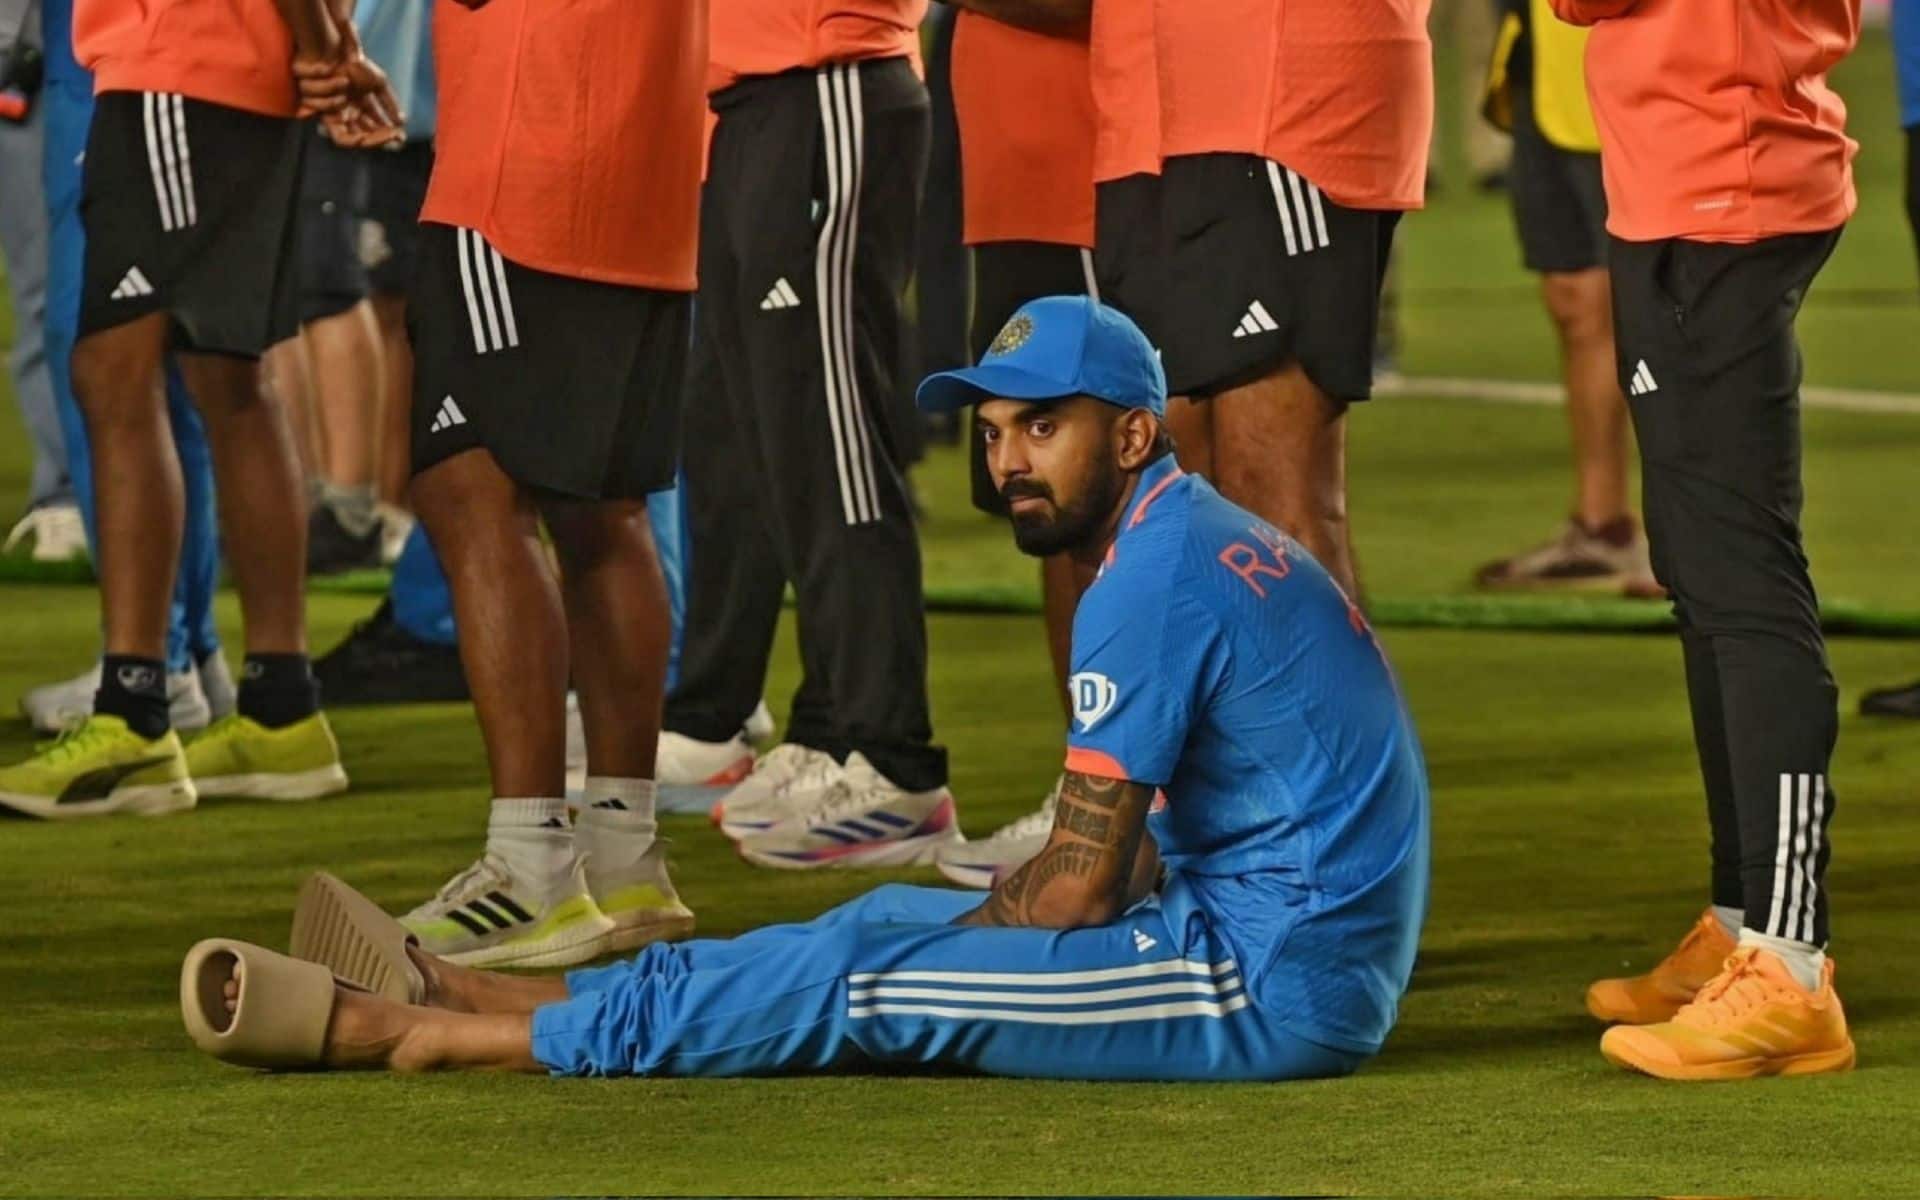 KL Rahul gutted after India's ODI WC finals loss to Australia (X.com)